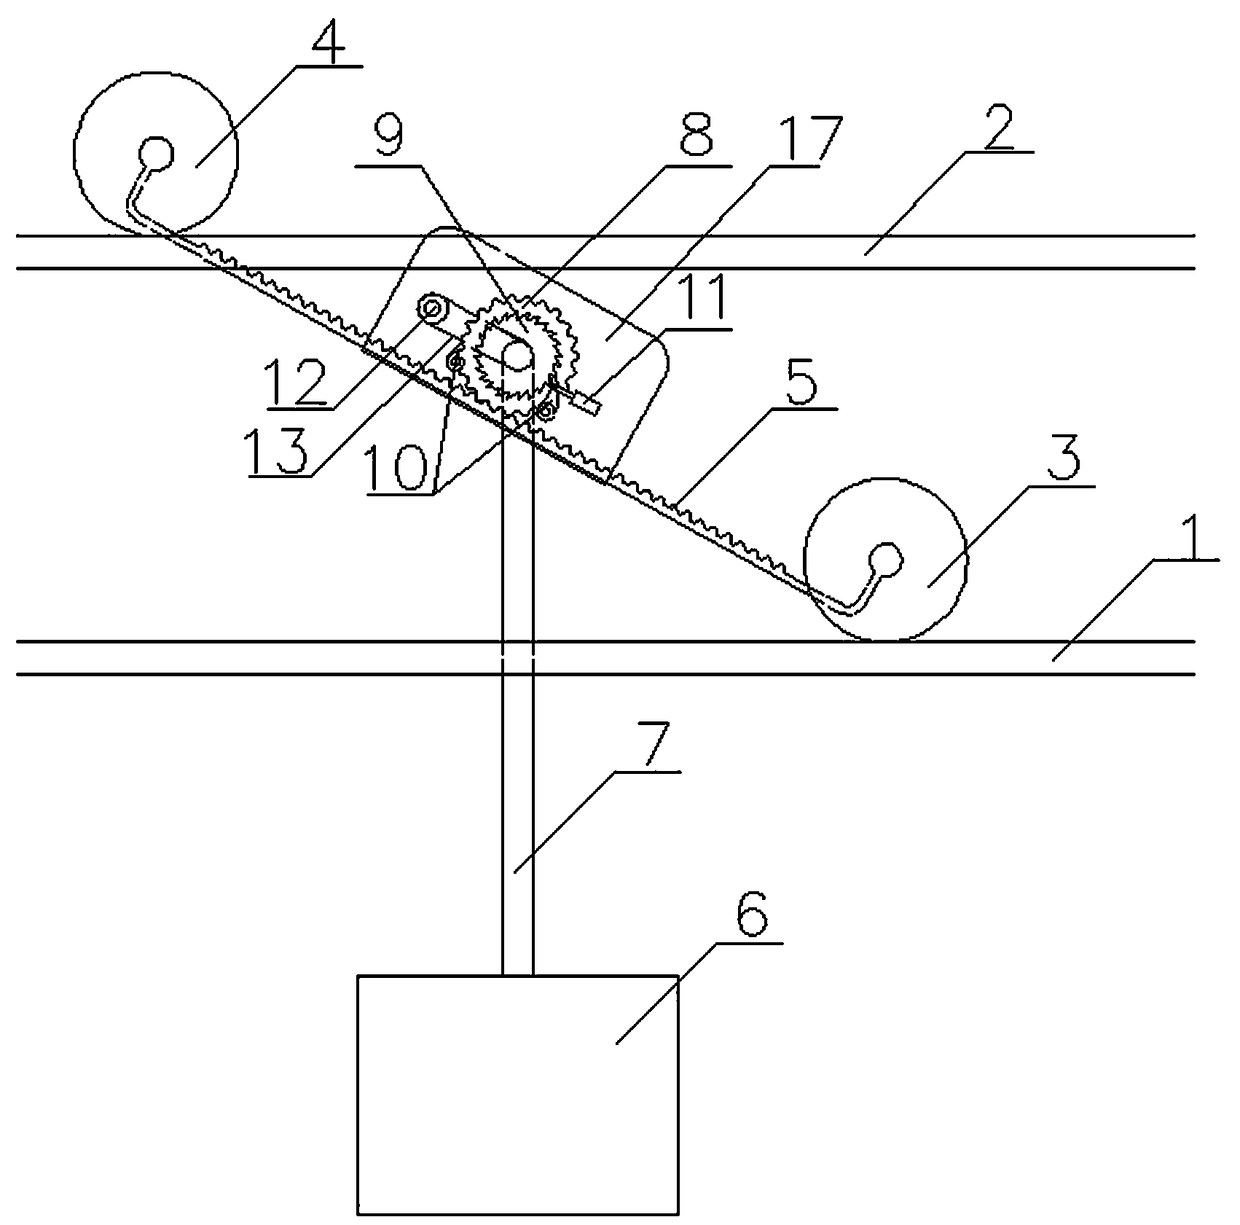 Compensated type aerial orbit carrying device for maintaining carrier running horizontally